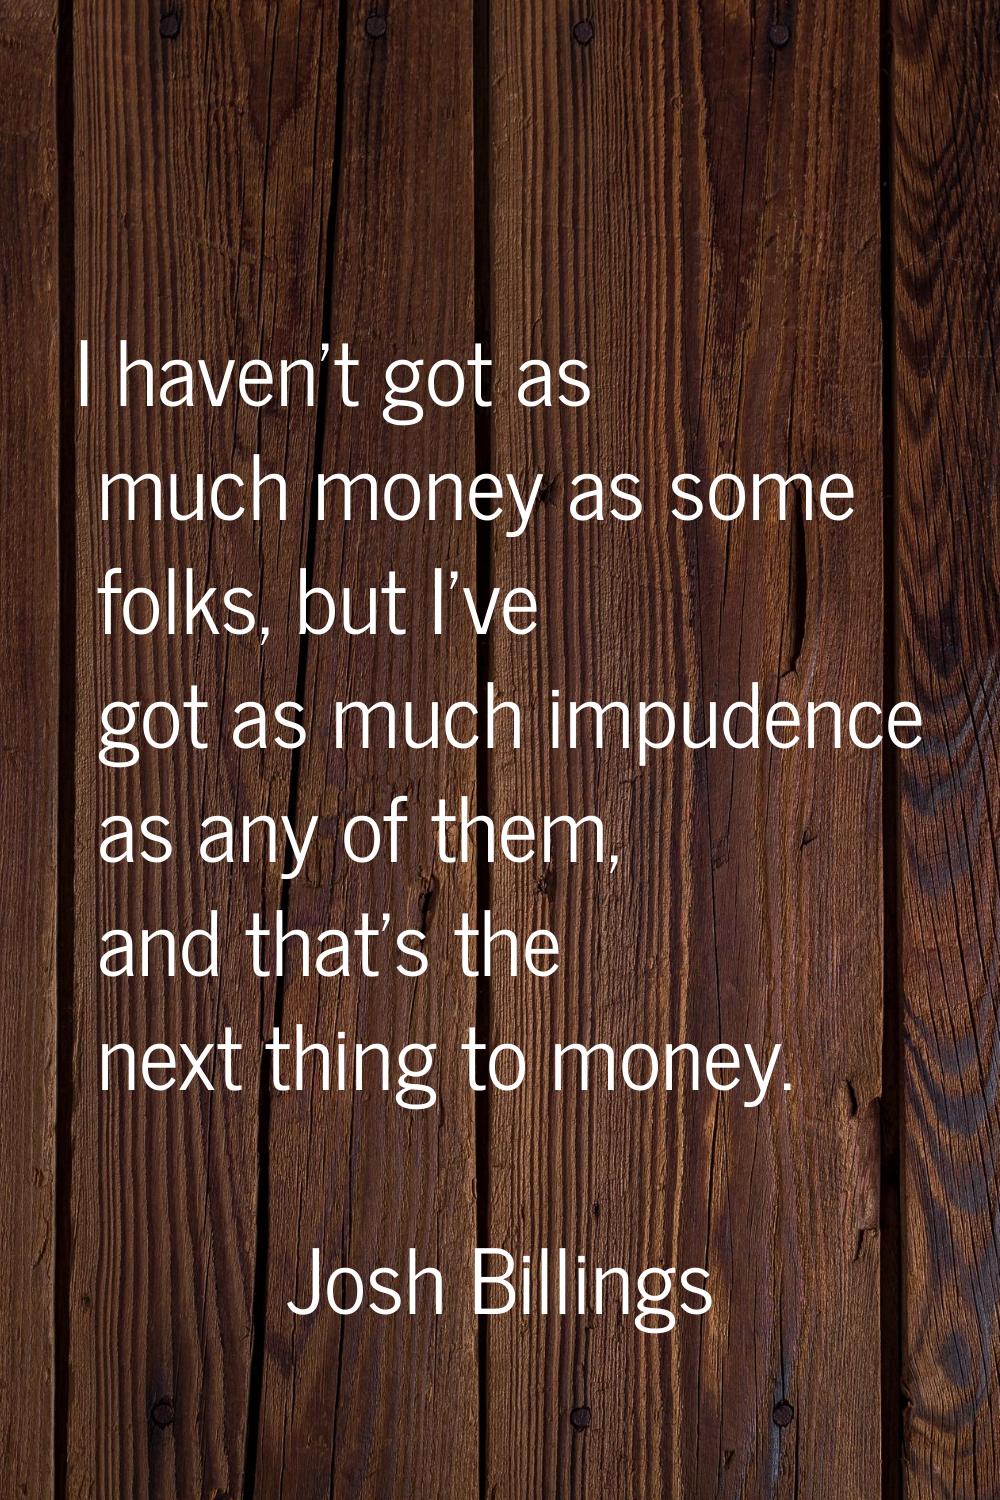 I haven't got as much money as some folks, but I've got as much impudence as any of them, and that'